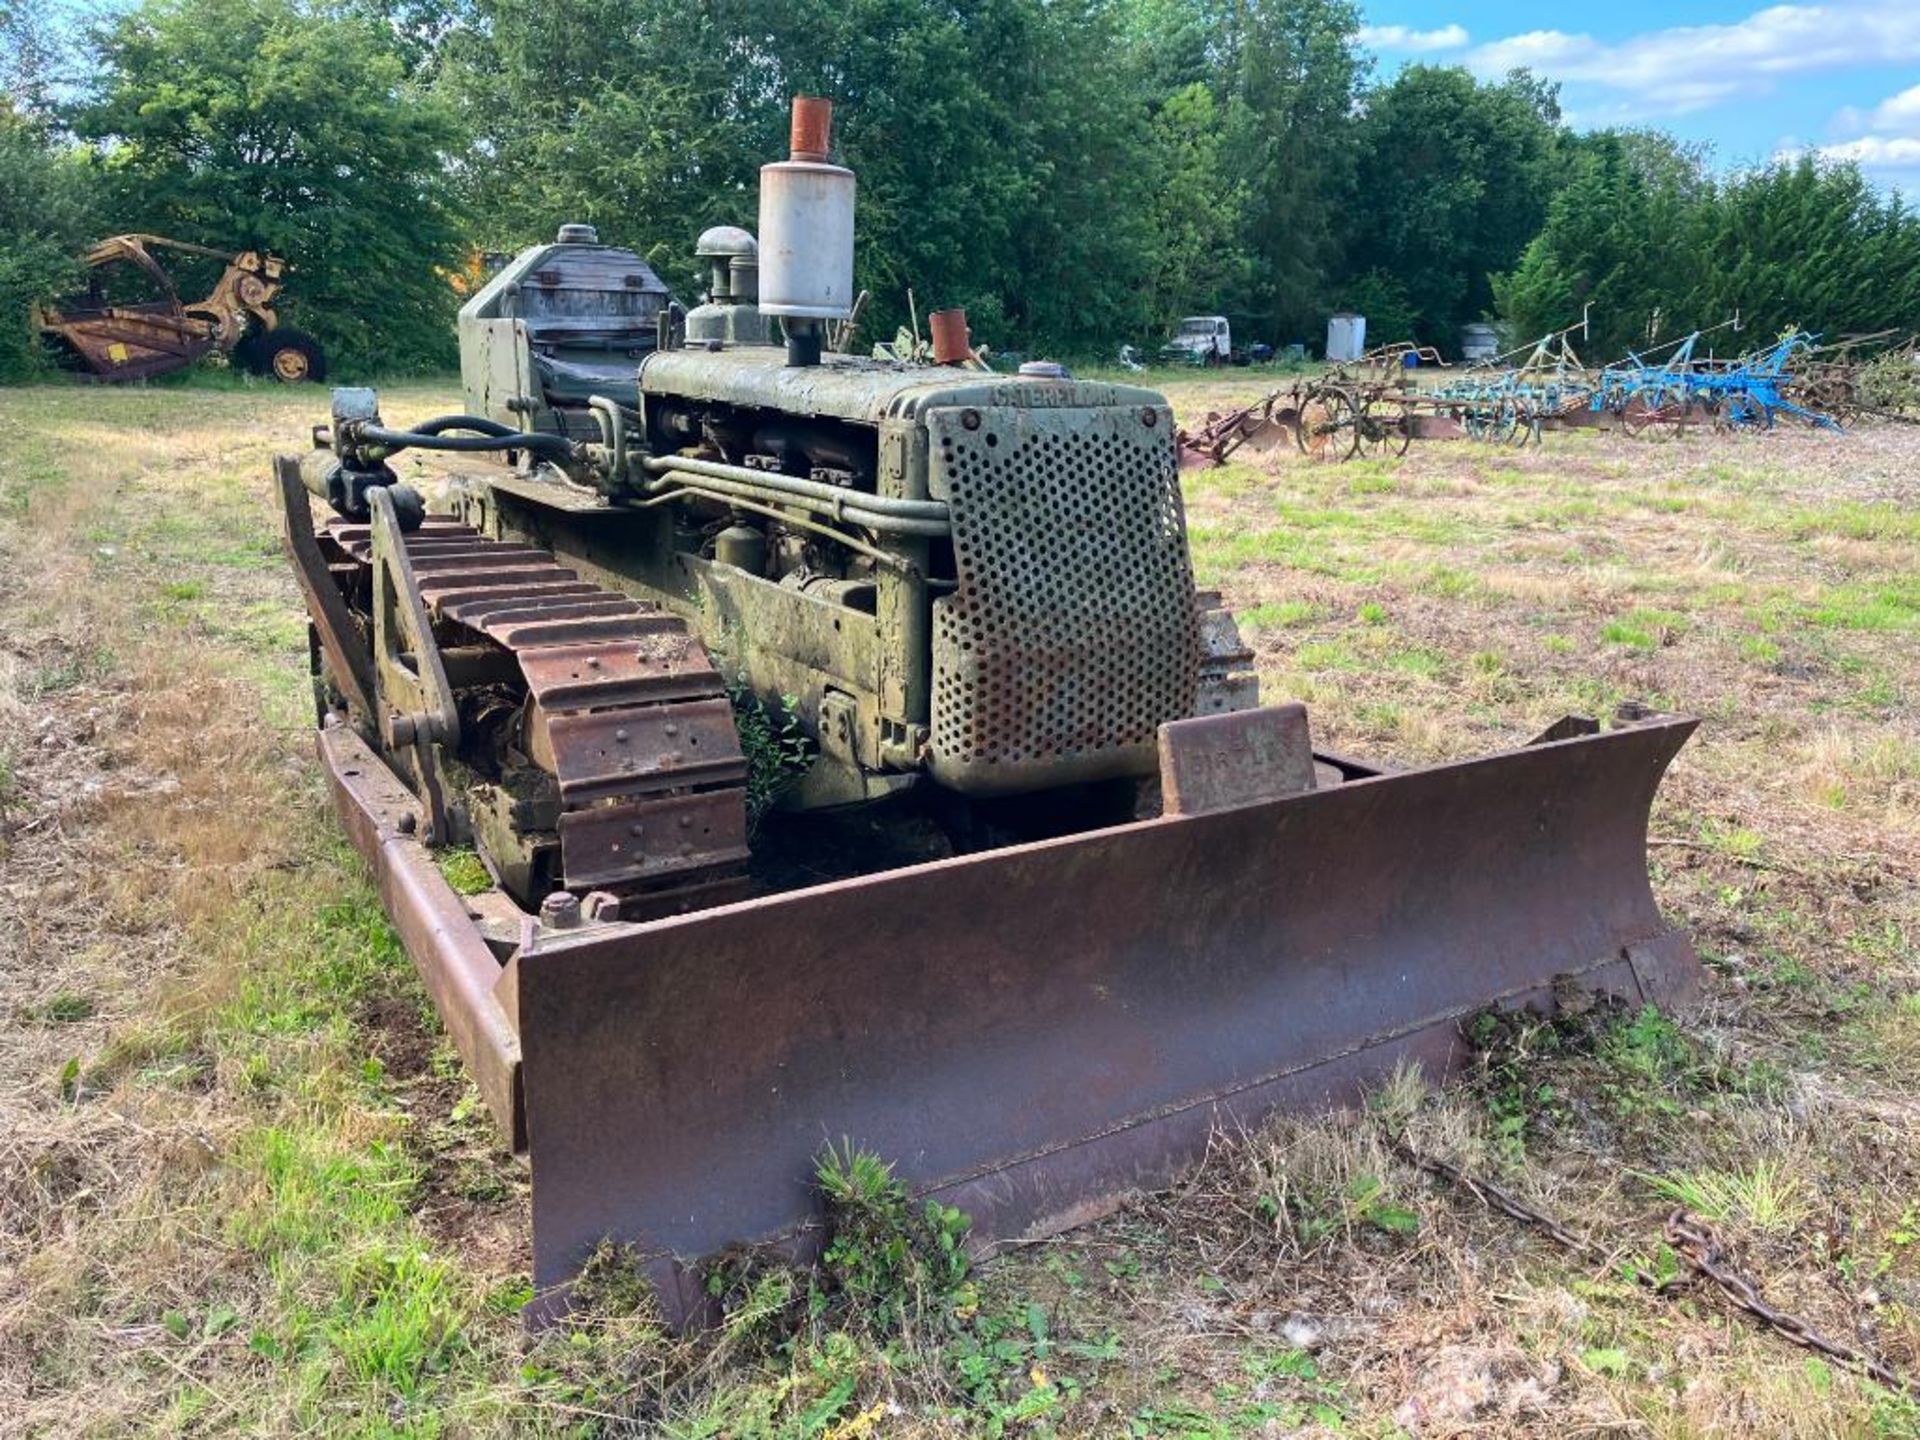 1948 Caterpillar D4 metal tracked crawler with 16" tracks, swinging drawbar, front grading blade and - Image 6 of 13